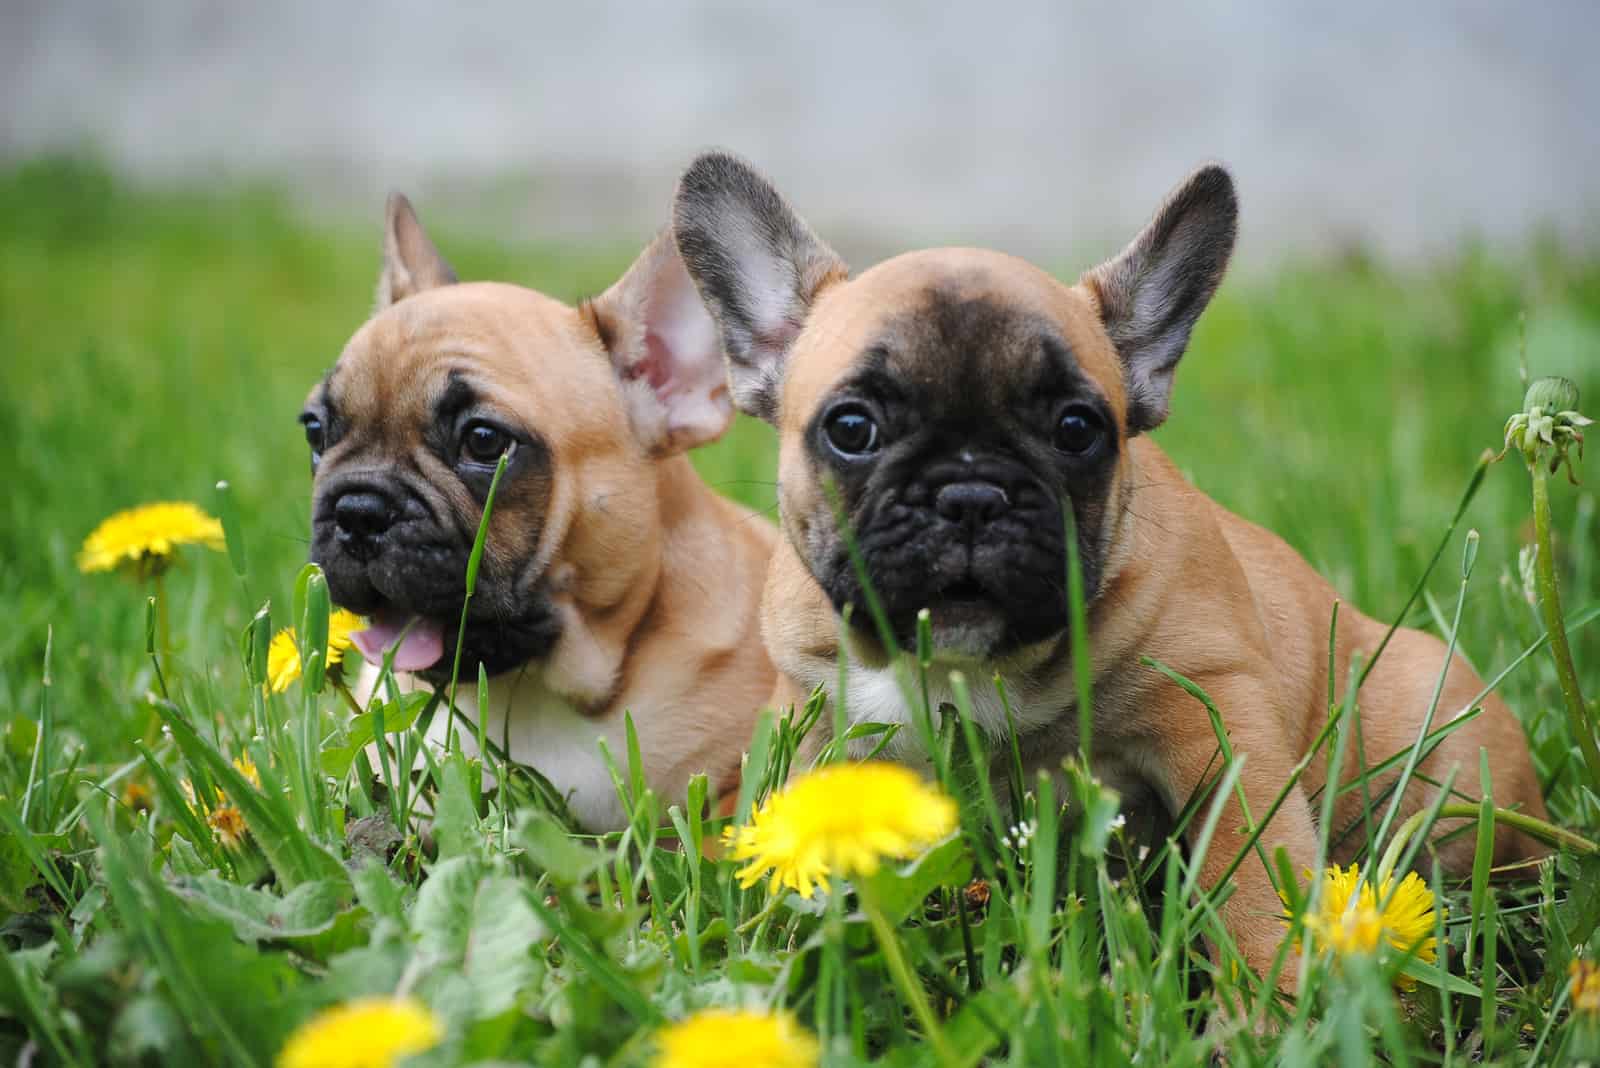 French Bulldog puppies on the grass